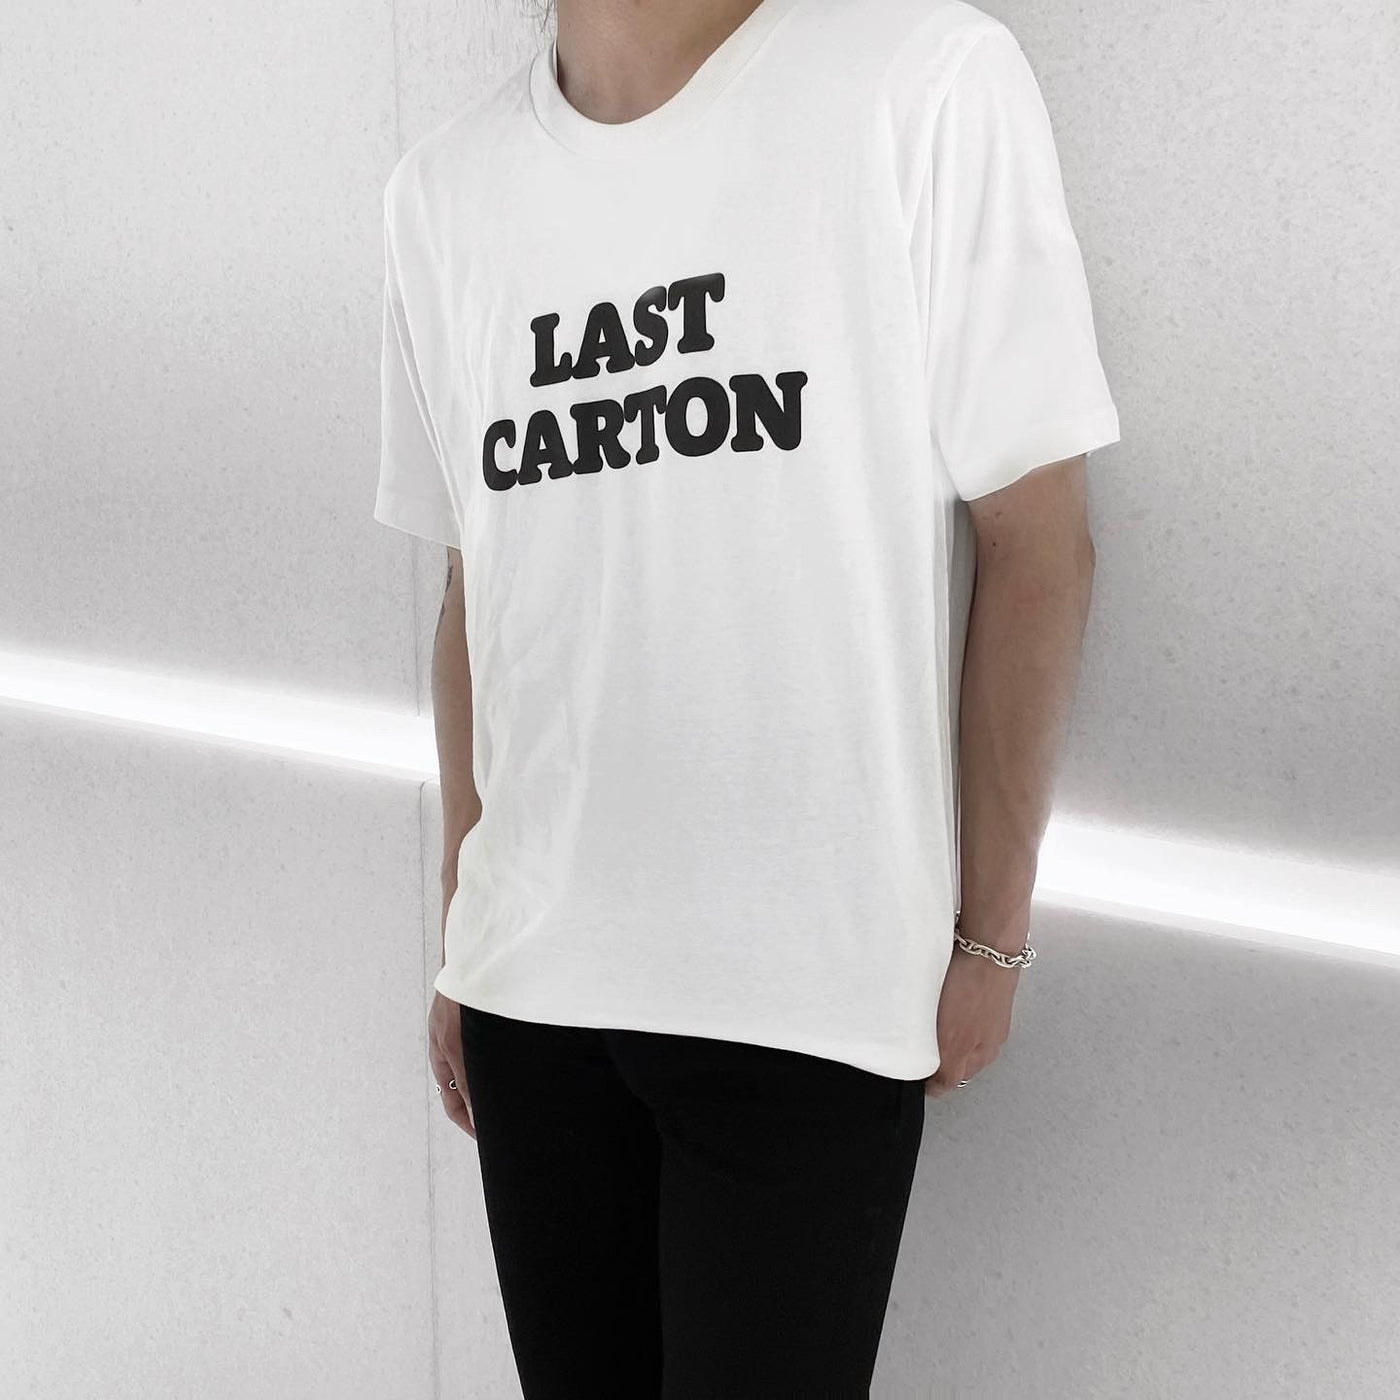 [Instant delivery]"Last Carton"T-shirt (white)